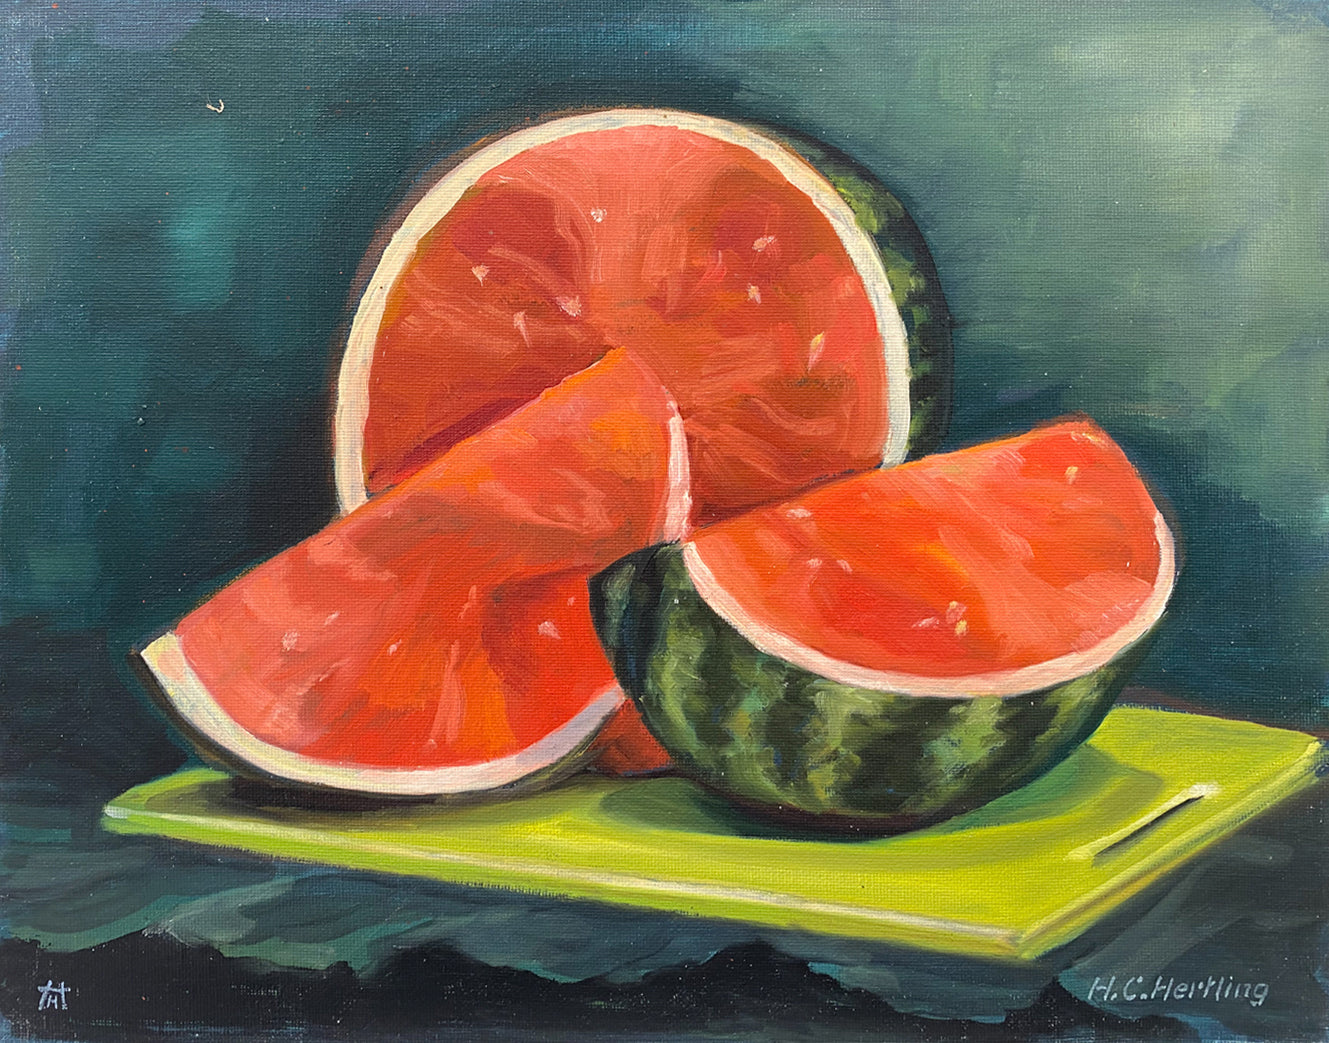 Watermelon. Still life painting by Heiner Hertling.  Oil on board.  